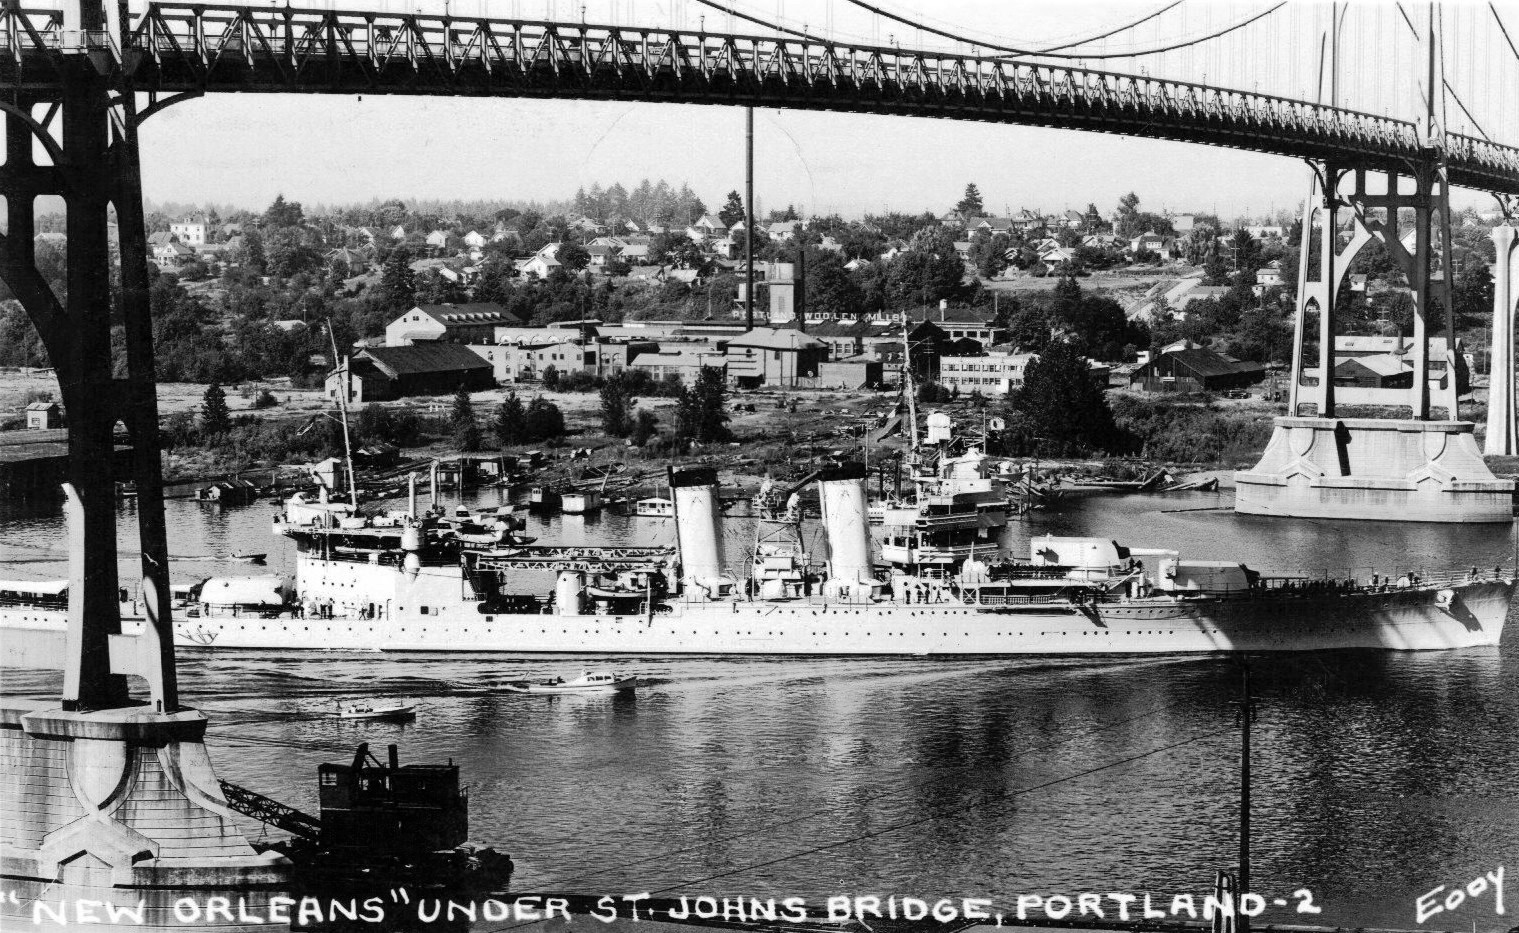 USS New Orleans arriving in Portland, Oregon, United States passing under the St Johns Bridge on the Willamette River, 2 Aug 1934. She was escorting USS Houston which had President Franklin Roosevelt on board.